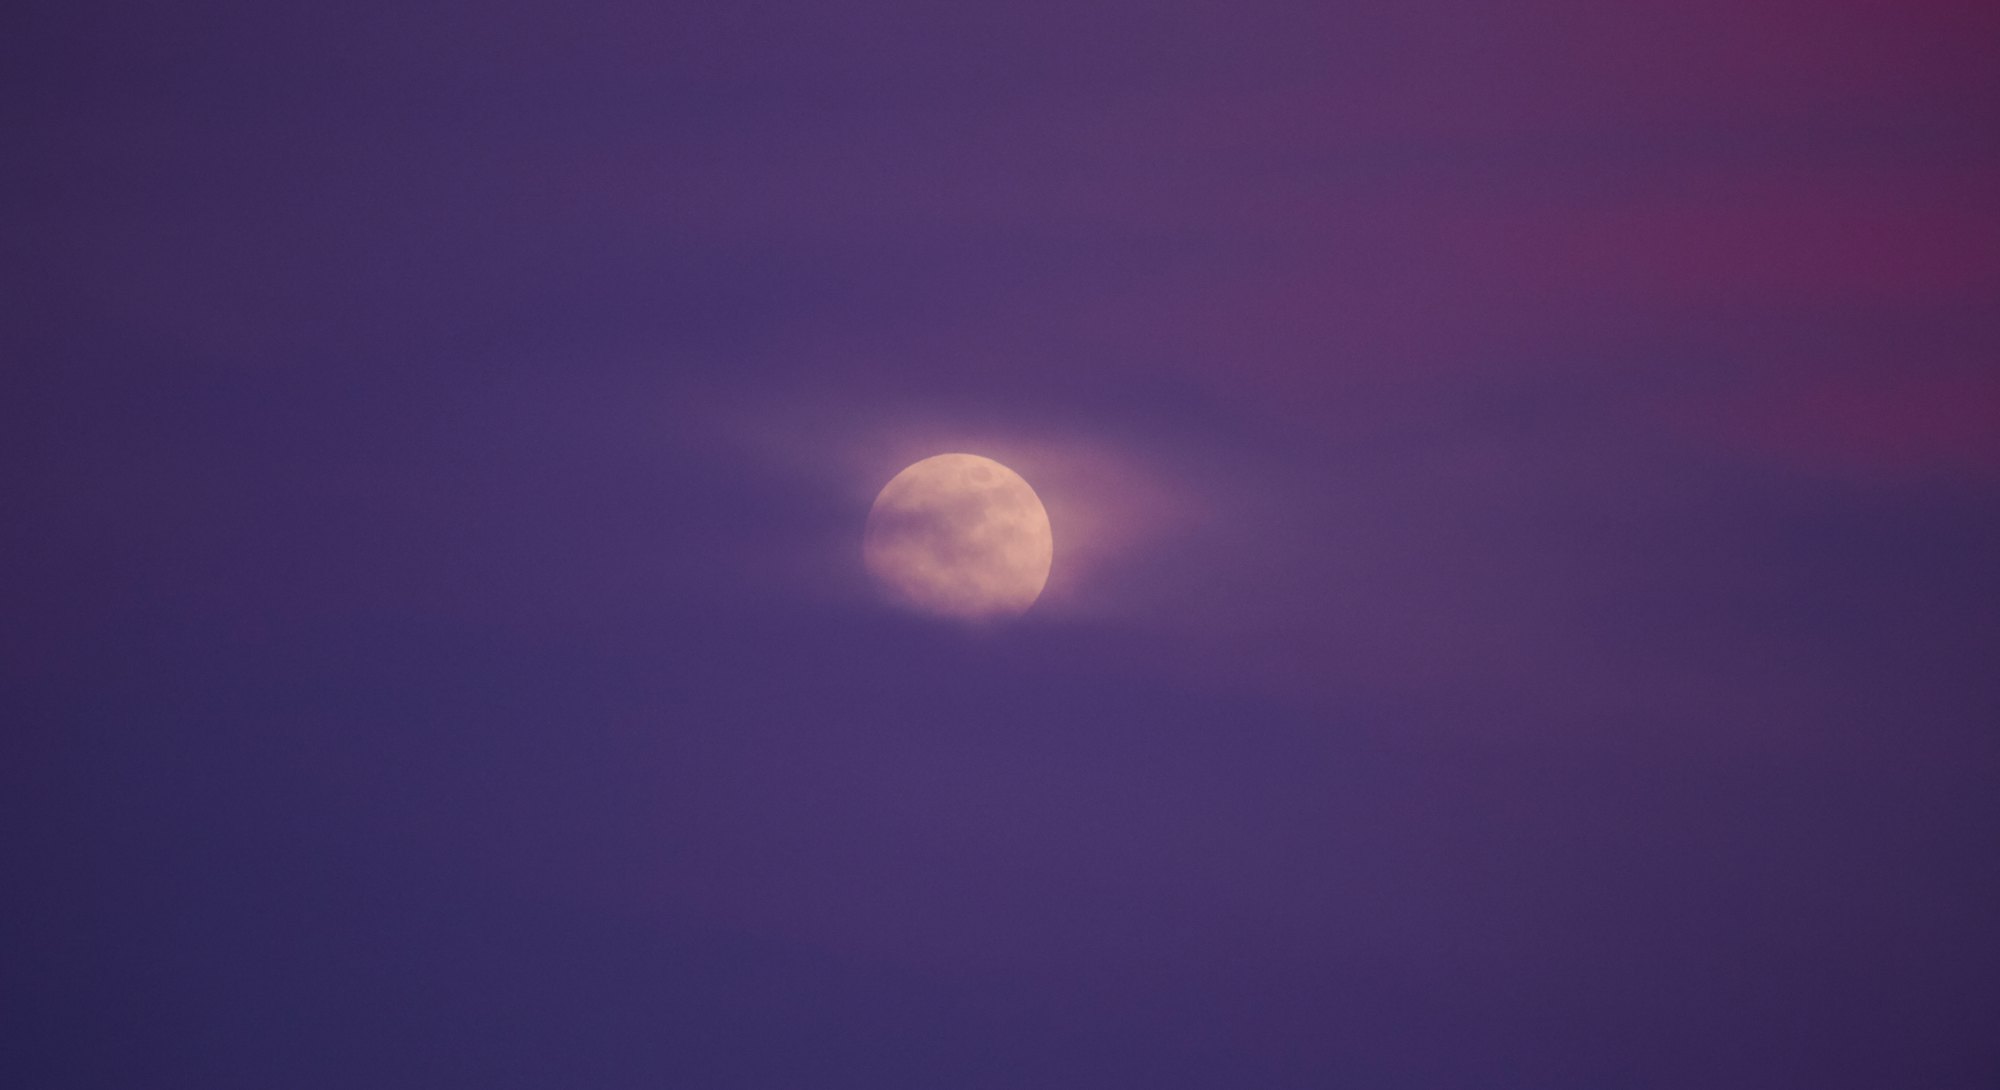 Nighttime sky with clouds and bright full moon. The April full "Pink" moon peaks on Apr. 16.